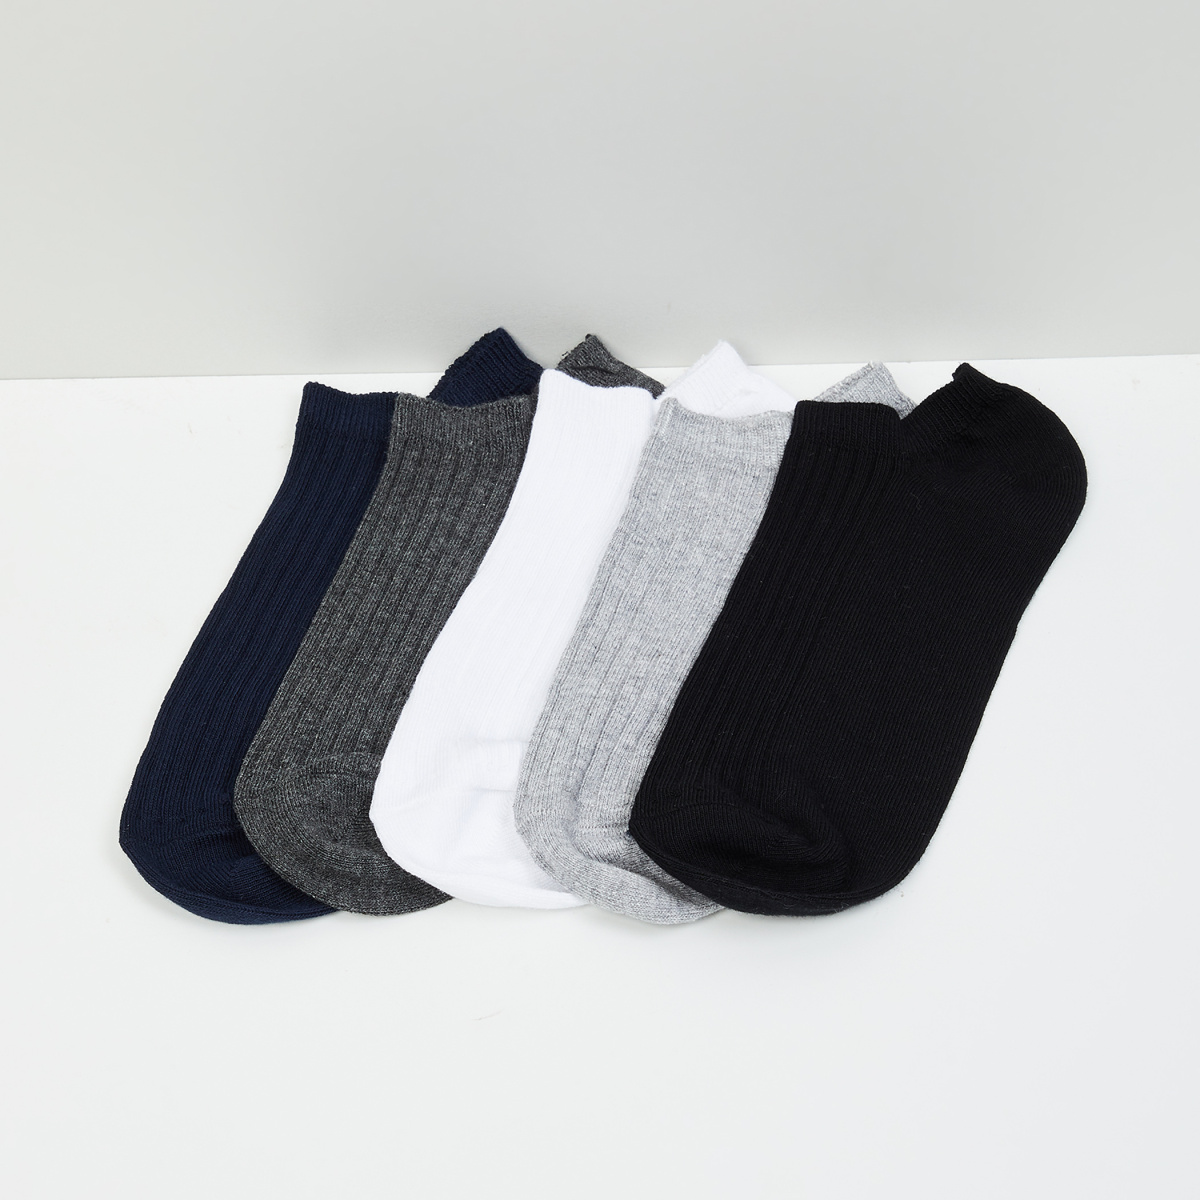 MAX Textured Socks - Pack of 5